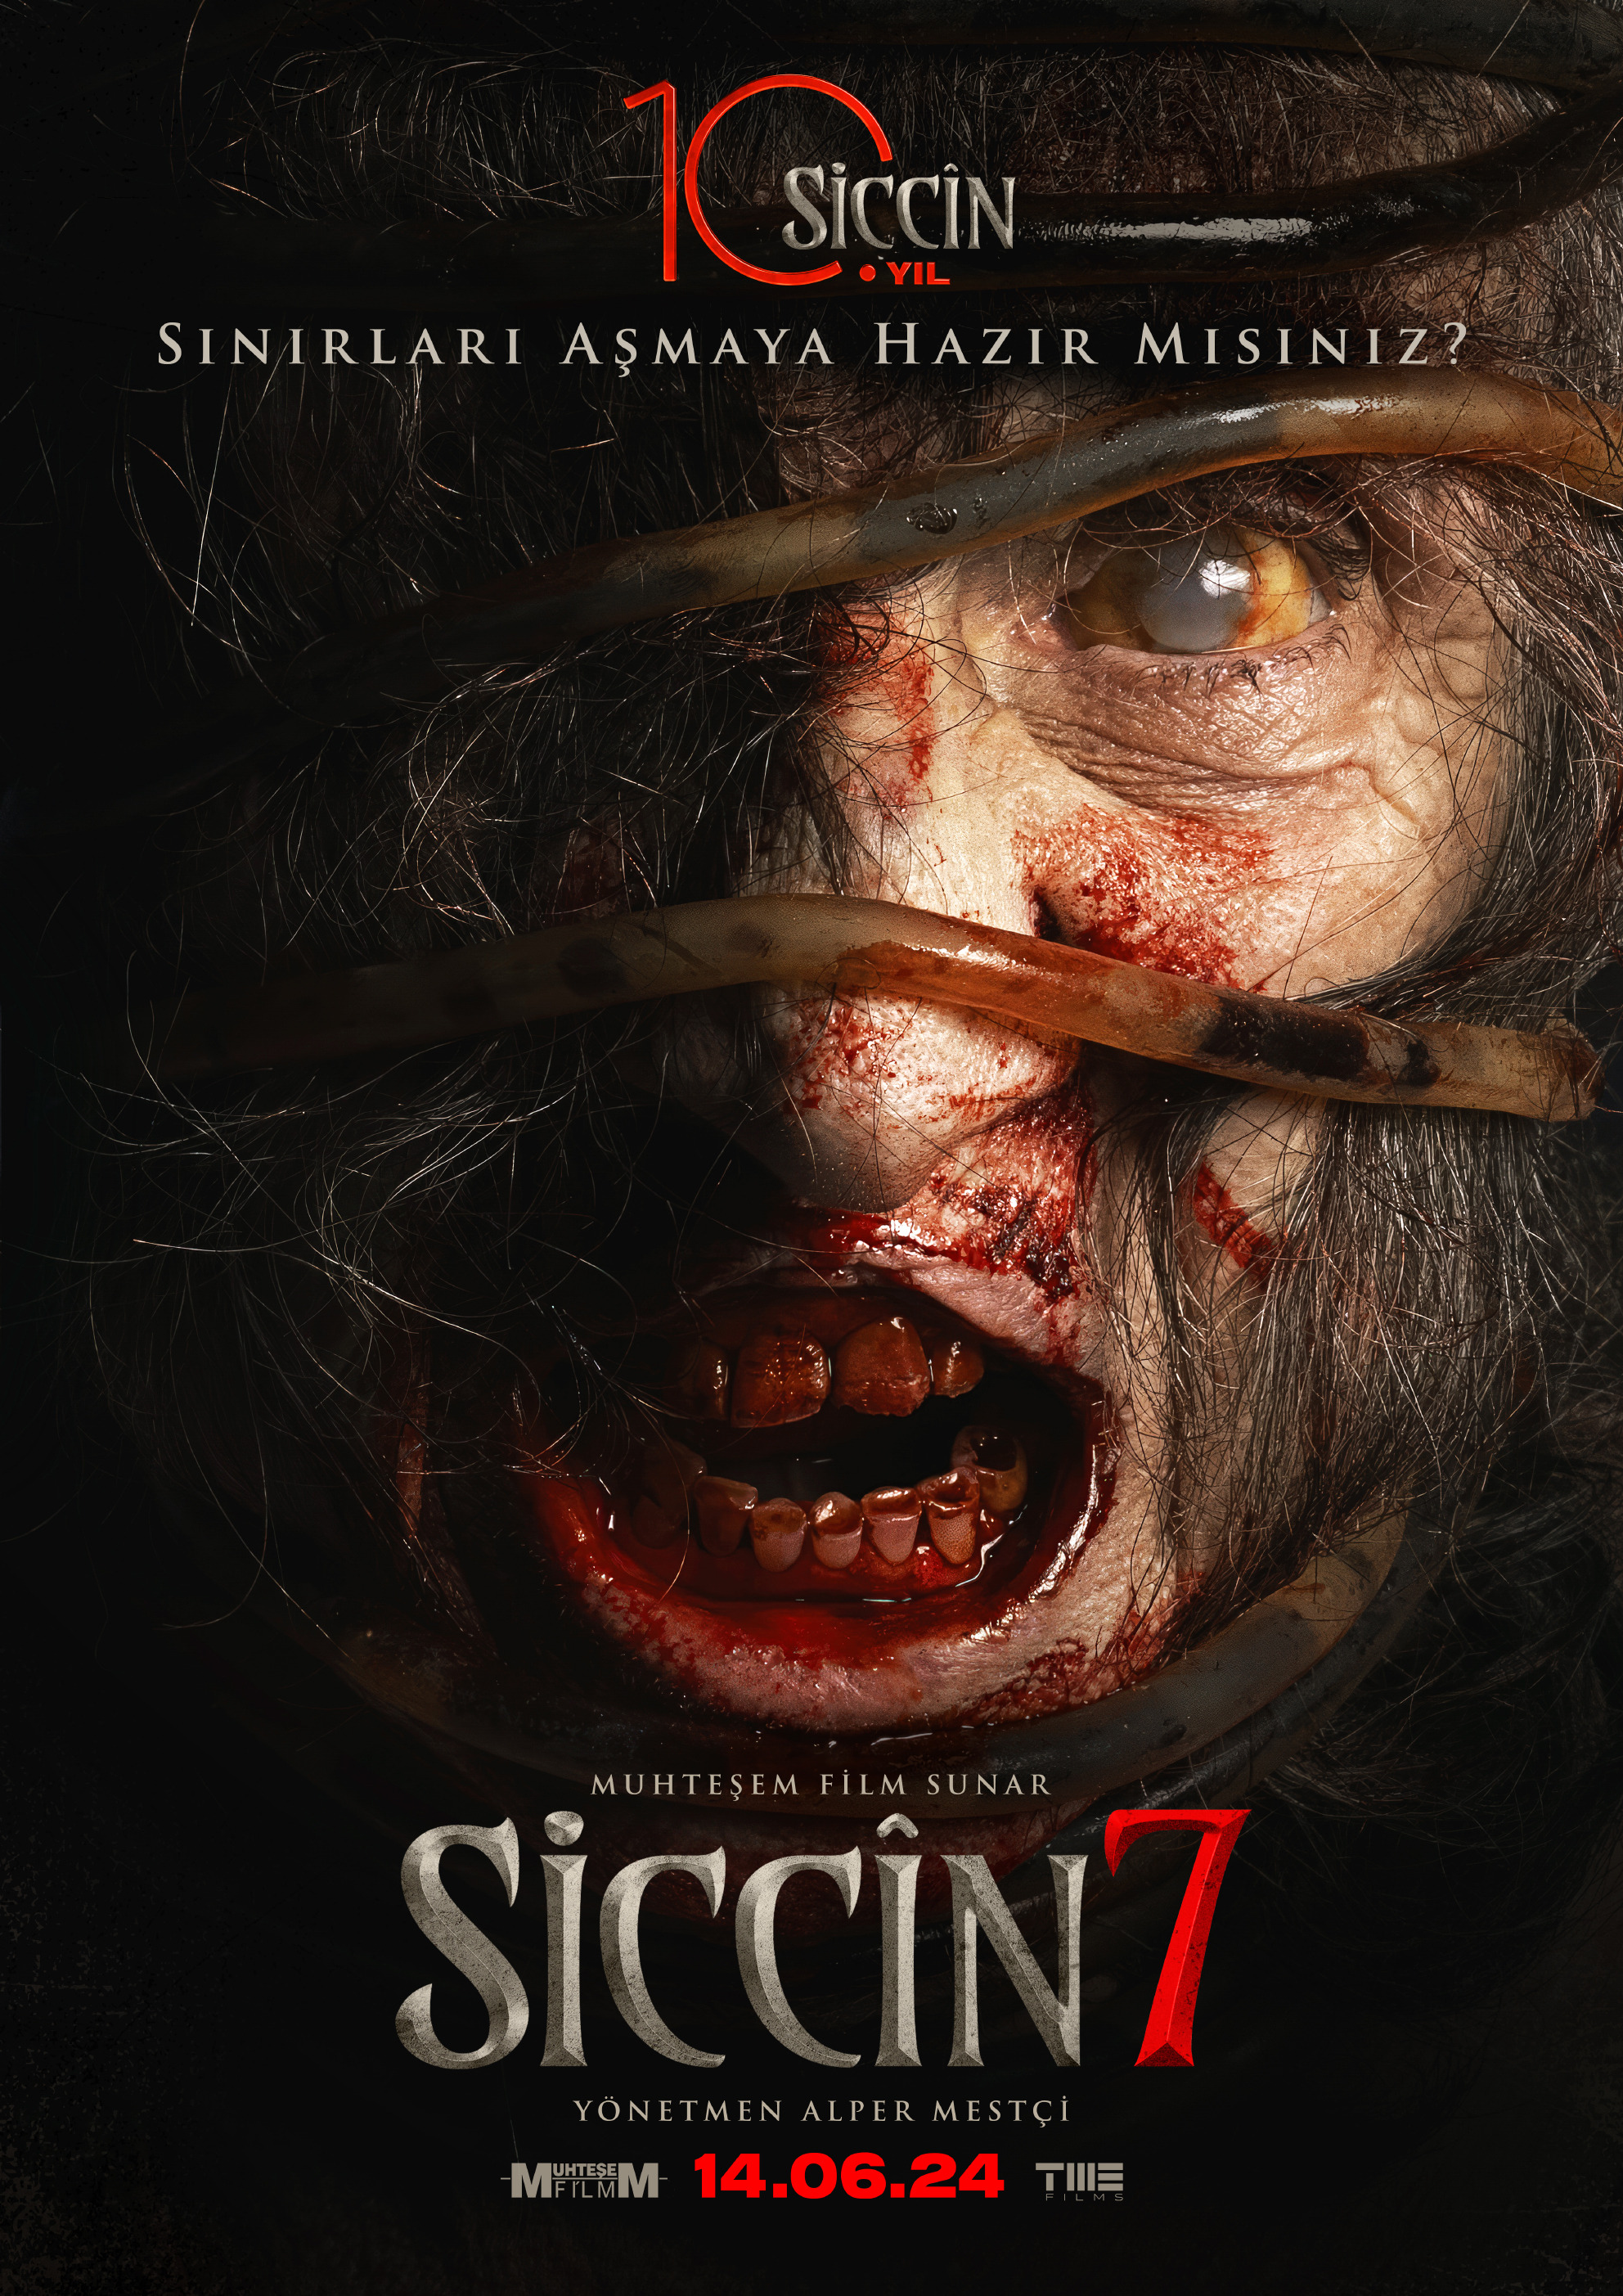 Mega Sized Movie Poster Image for Siccin 7 